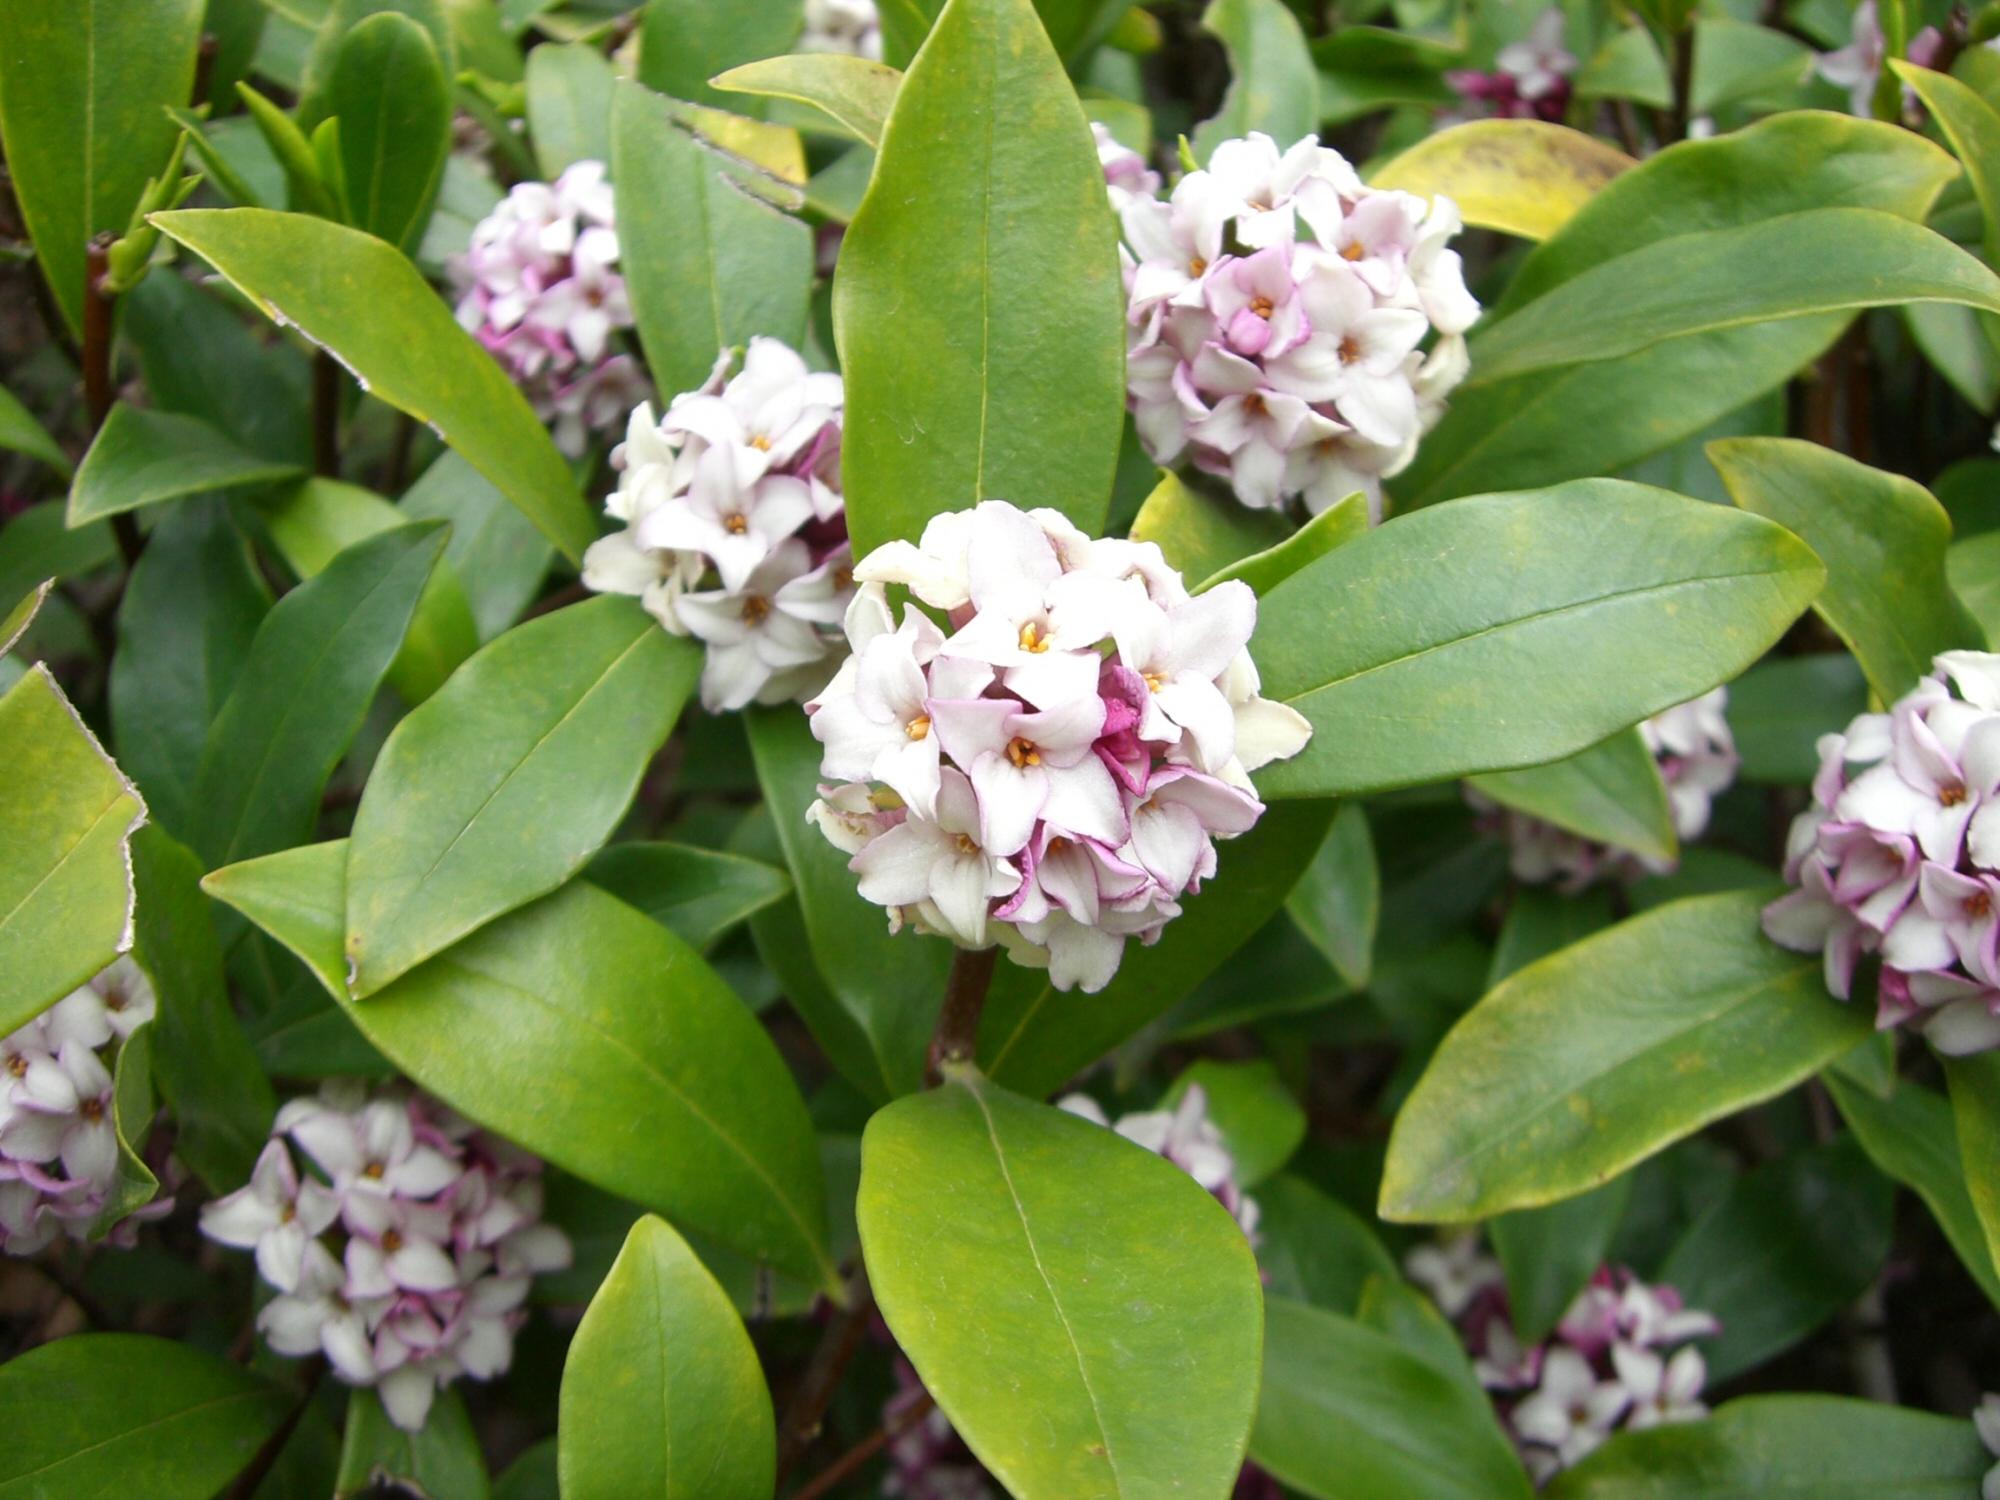 white-pink flowers with yellow center, yellow-green leaves and brown stems